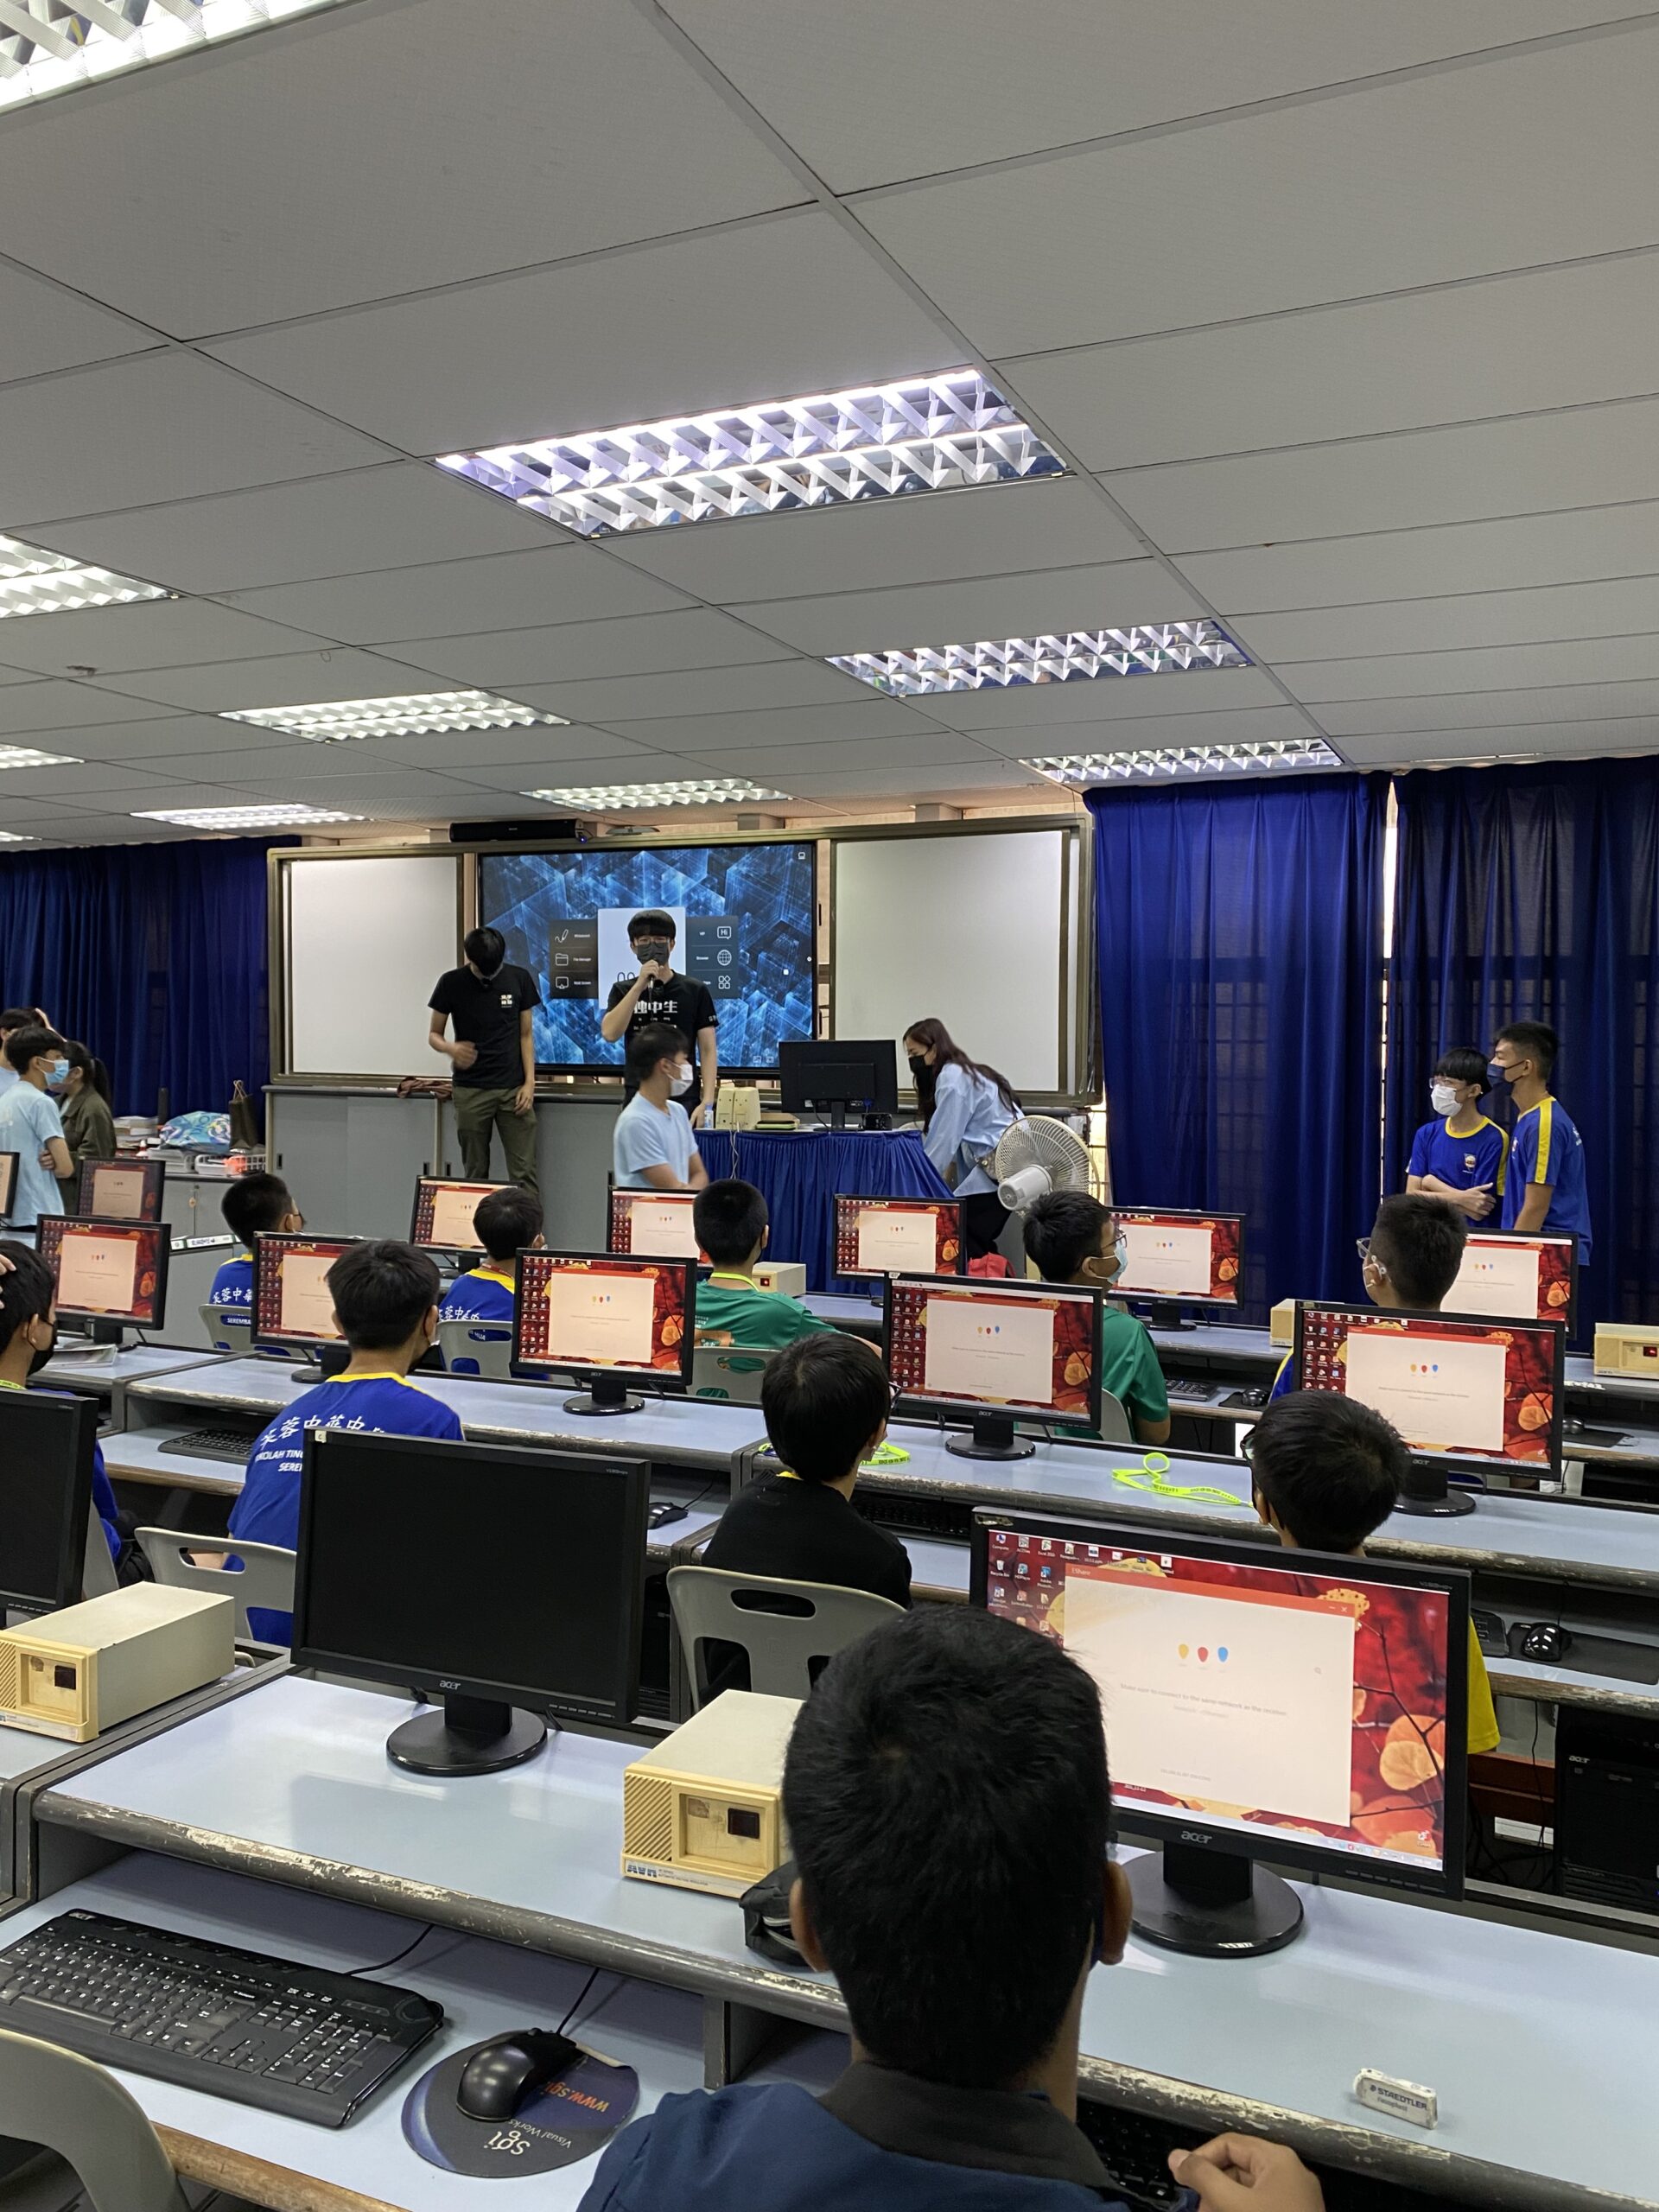 Computer lab at a school in malaysia